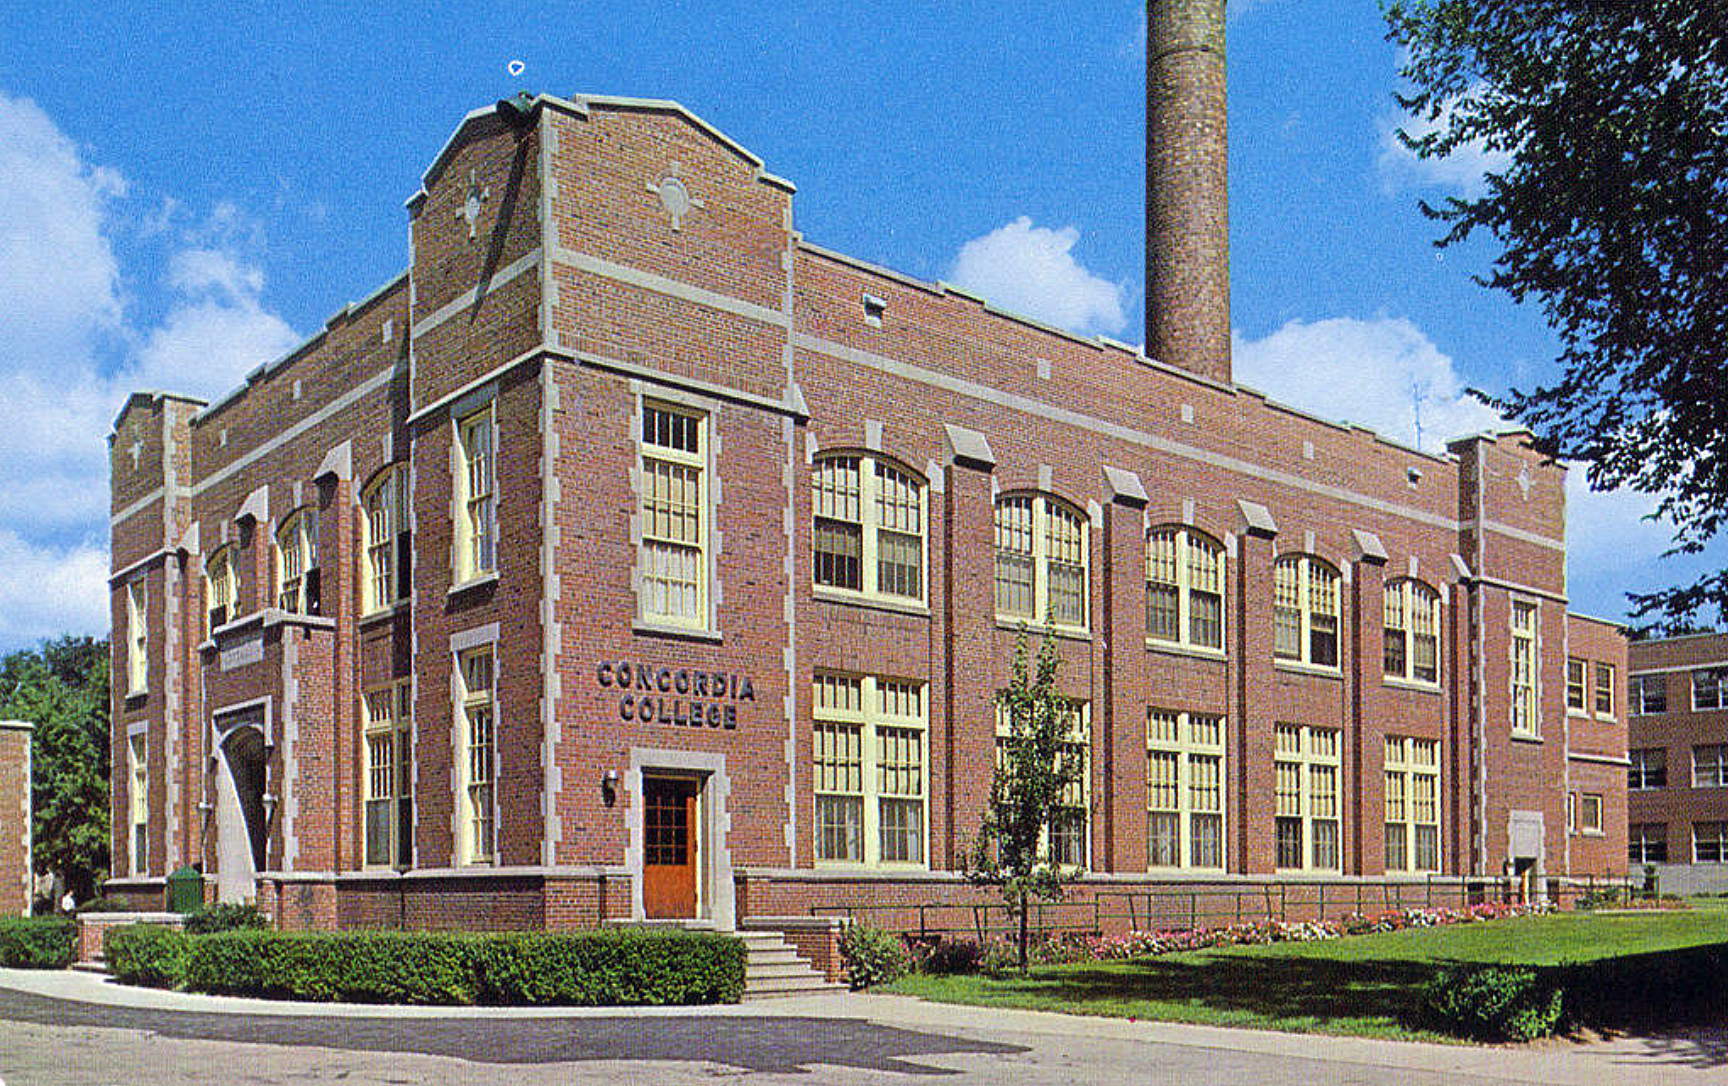 Two story brick refectory from an angle. A large smoke stack is visible on the roof. "Concordia College" in metal letters over the side entrance.